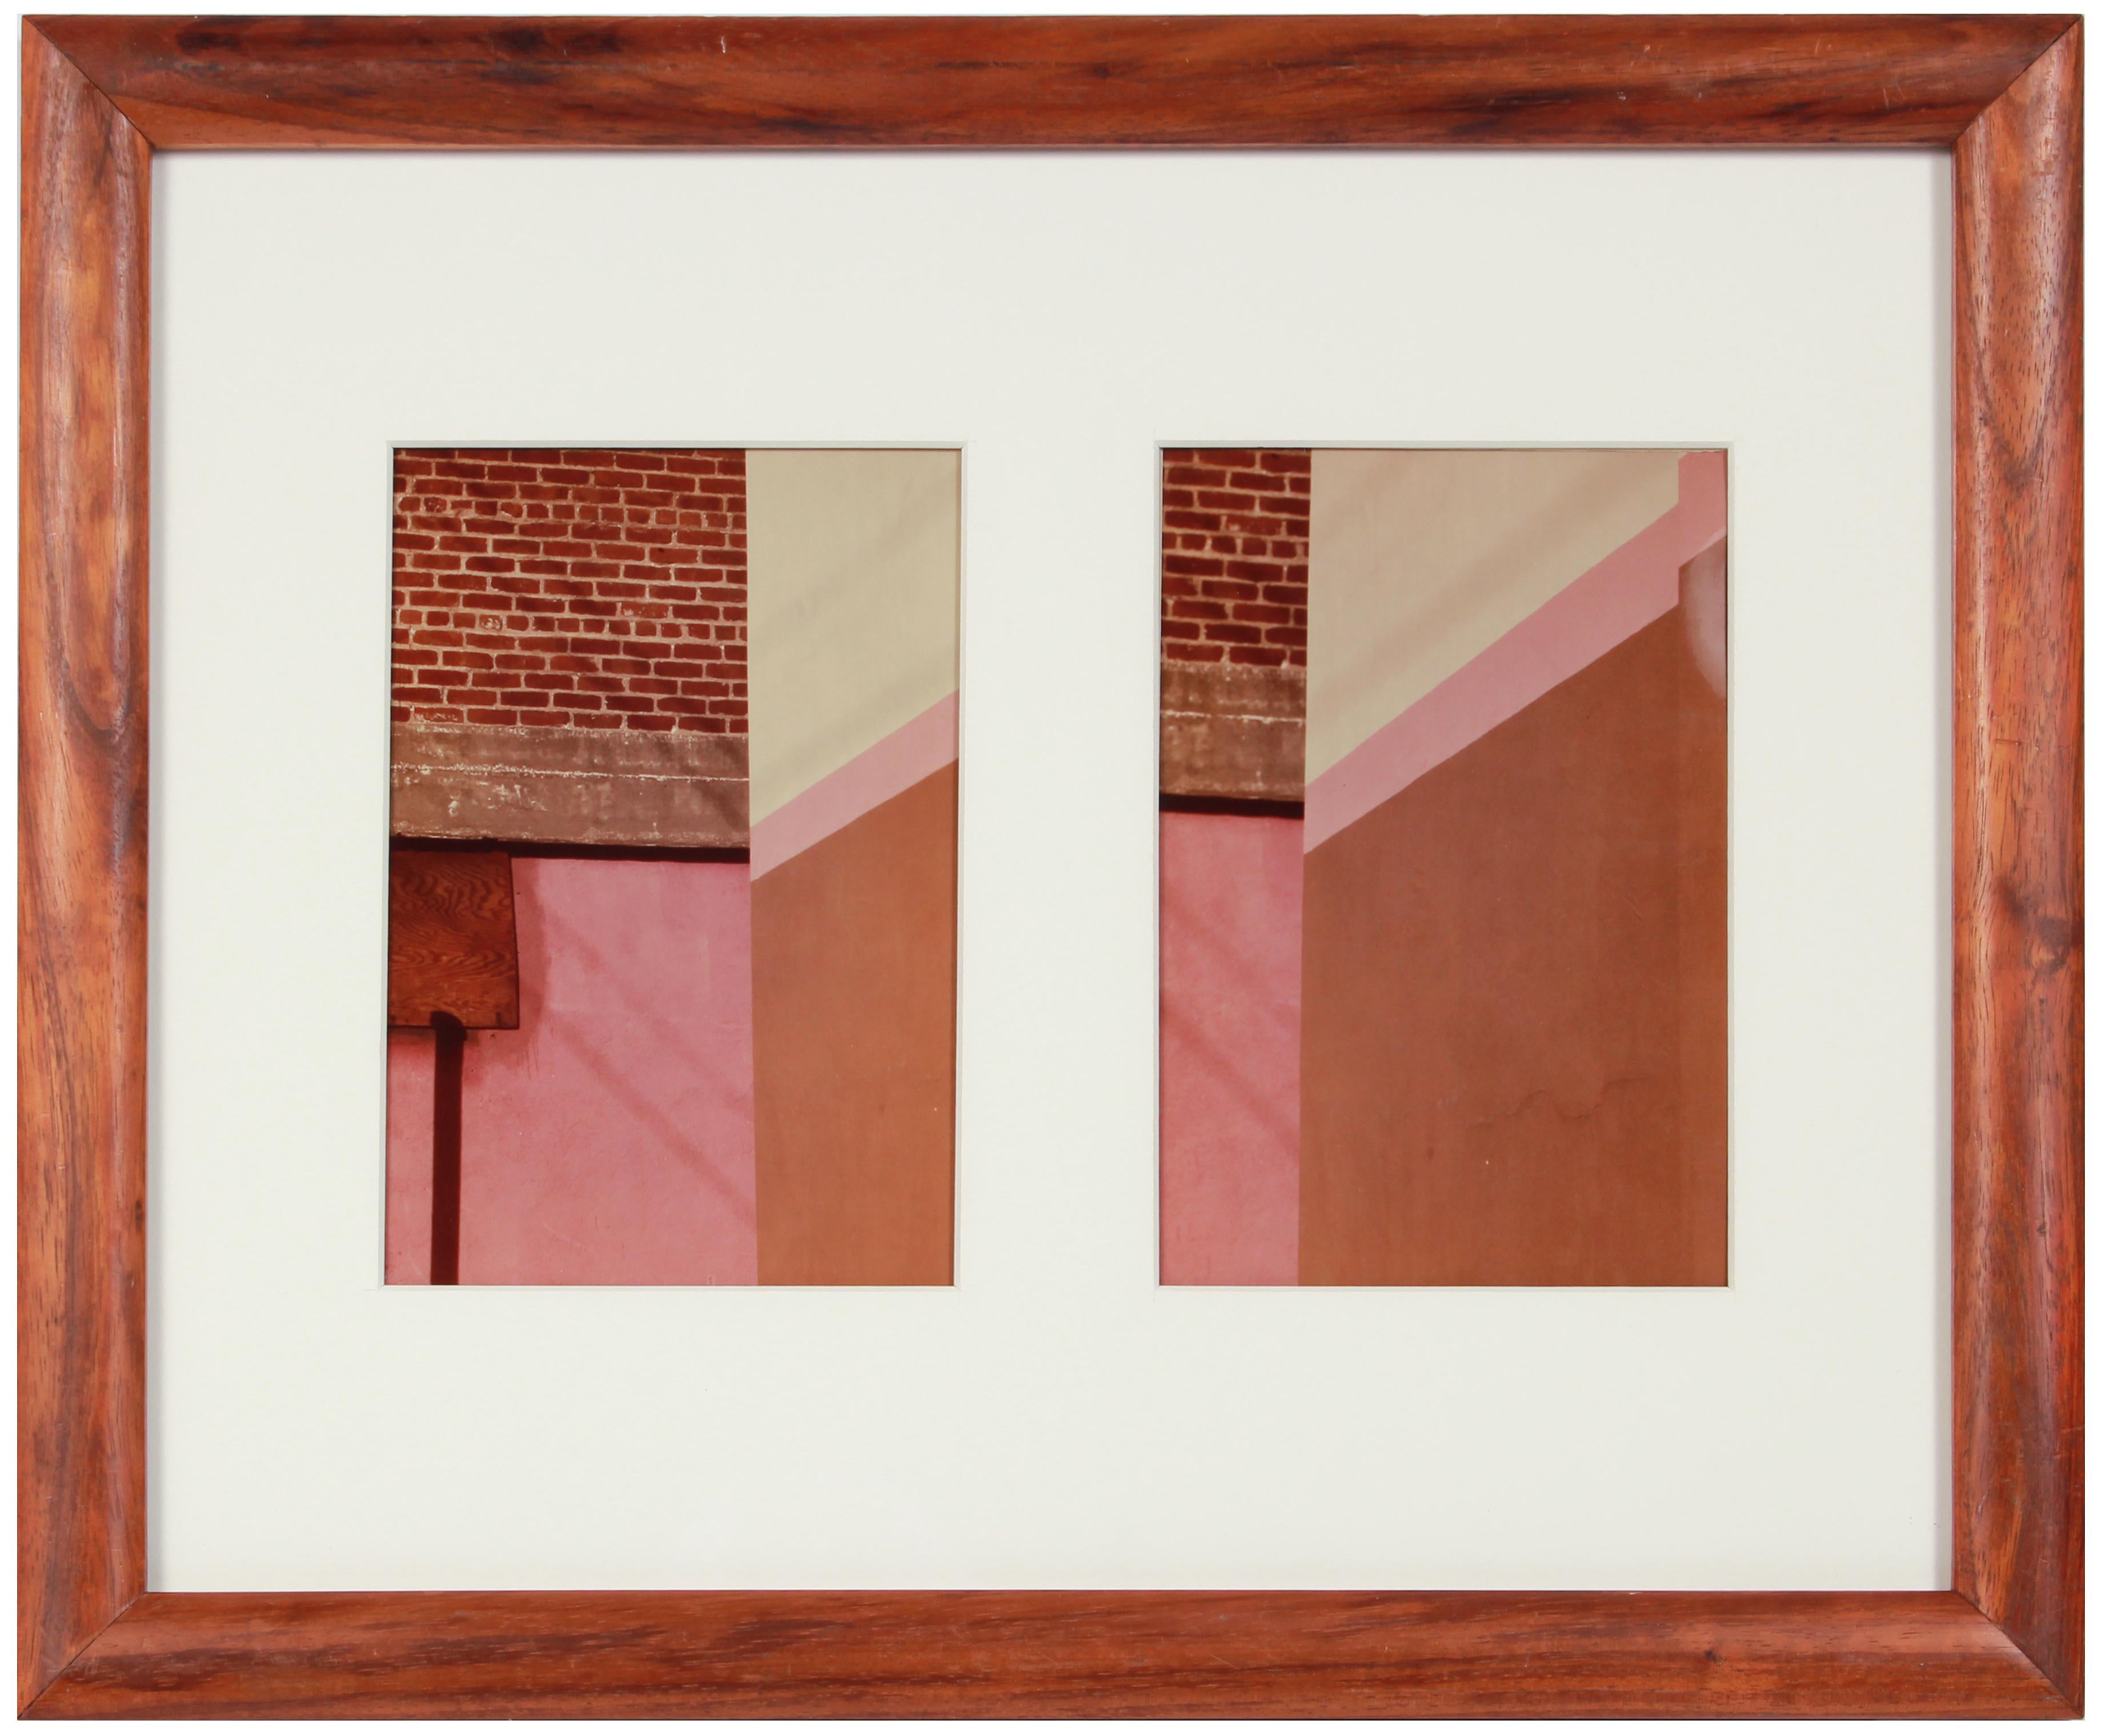 "City Art #17" Diptych Color Photographs of a San Francisco Pink Brick Wall